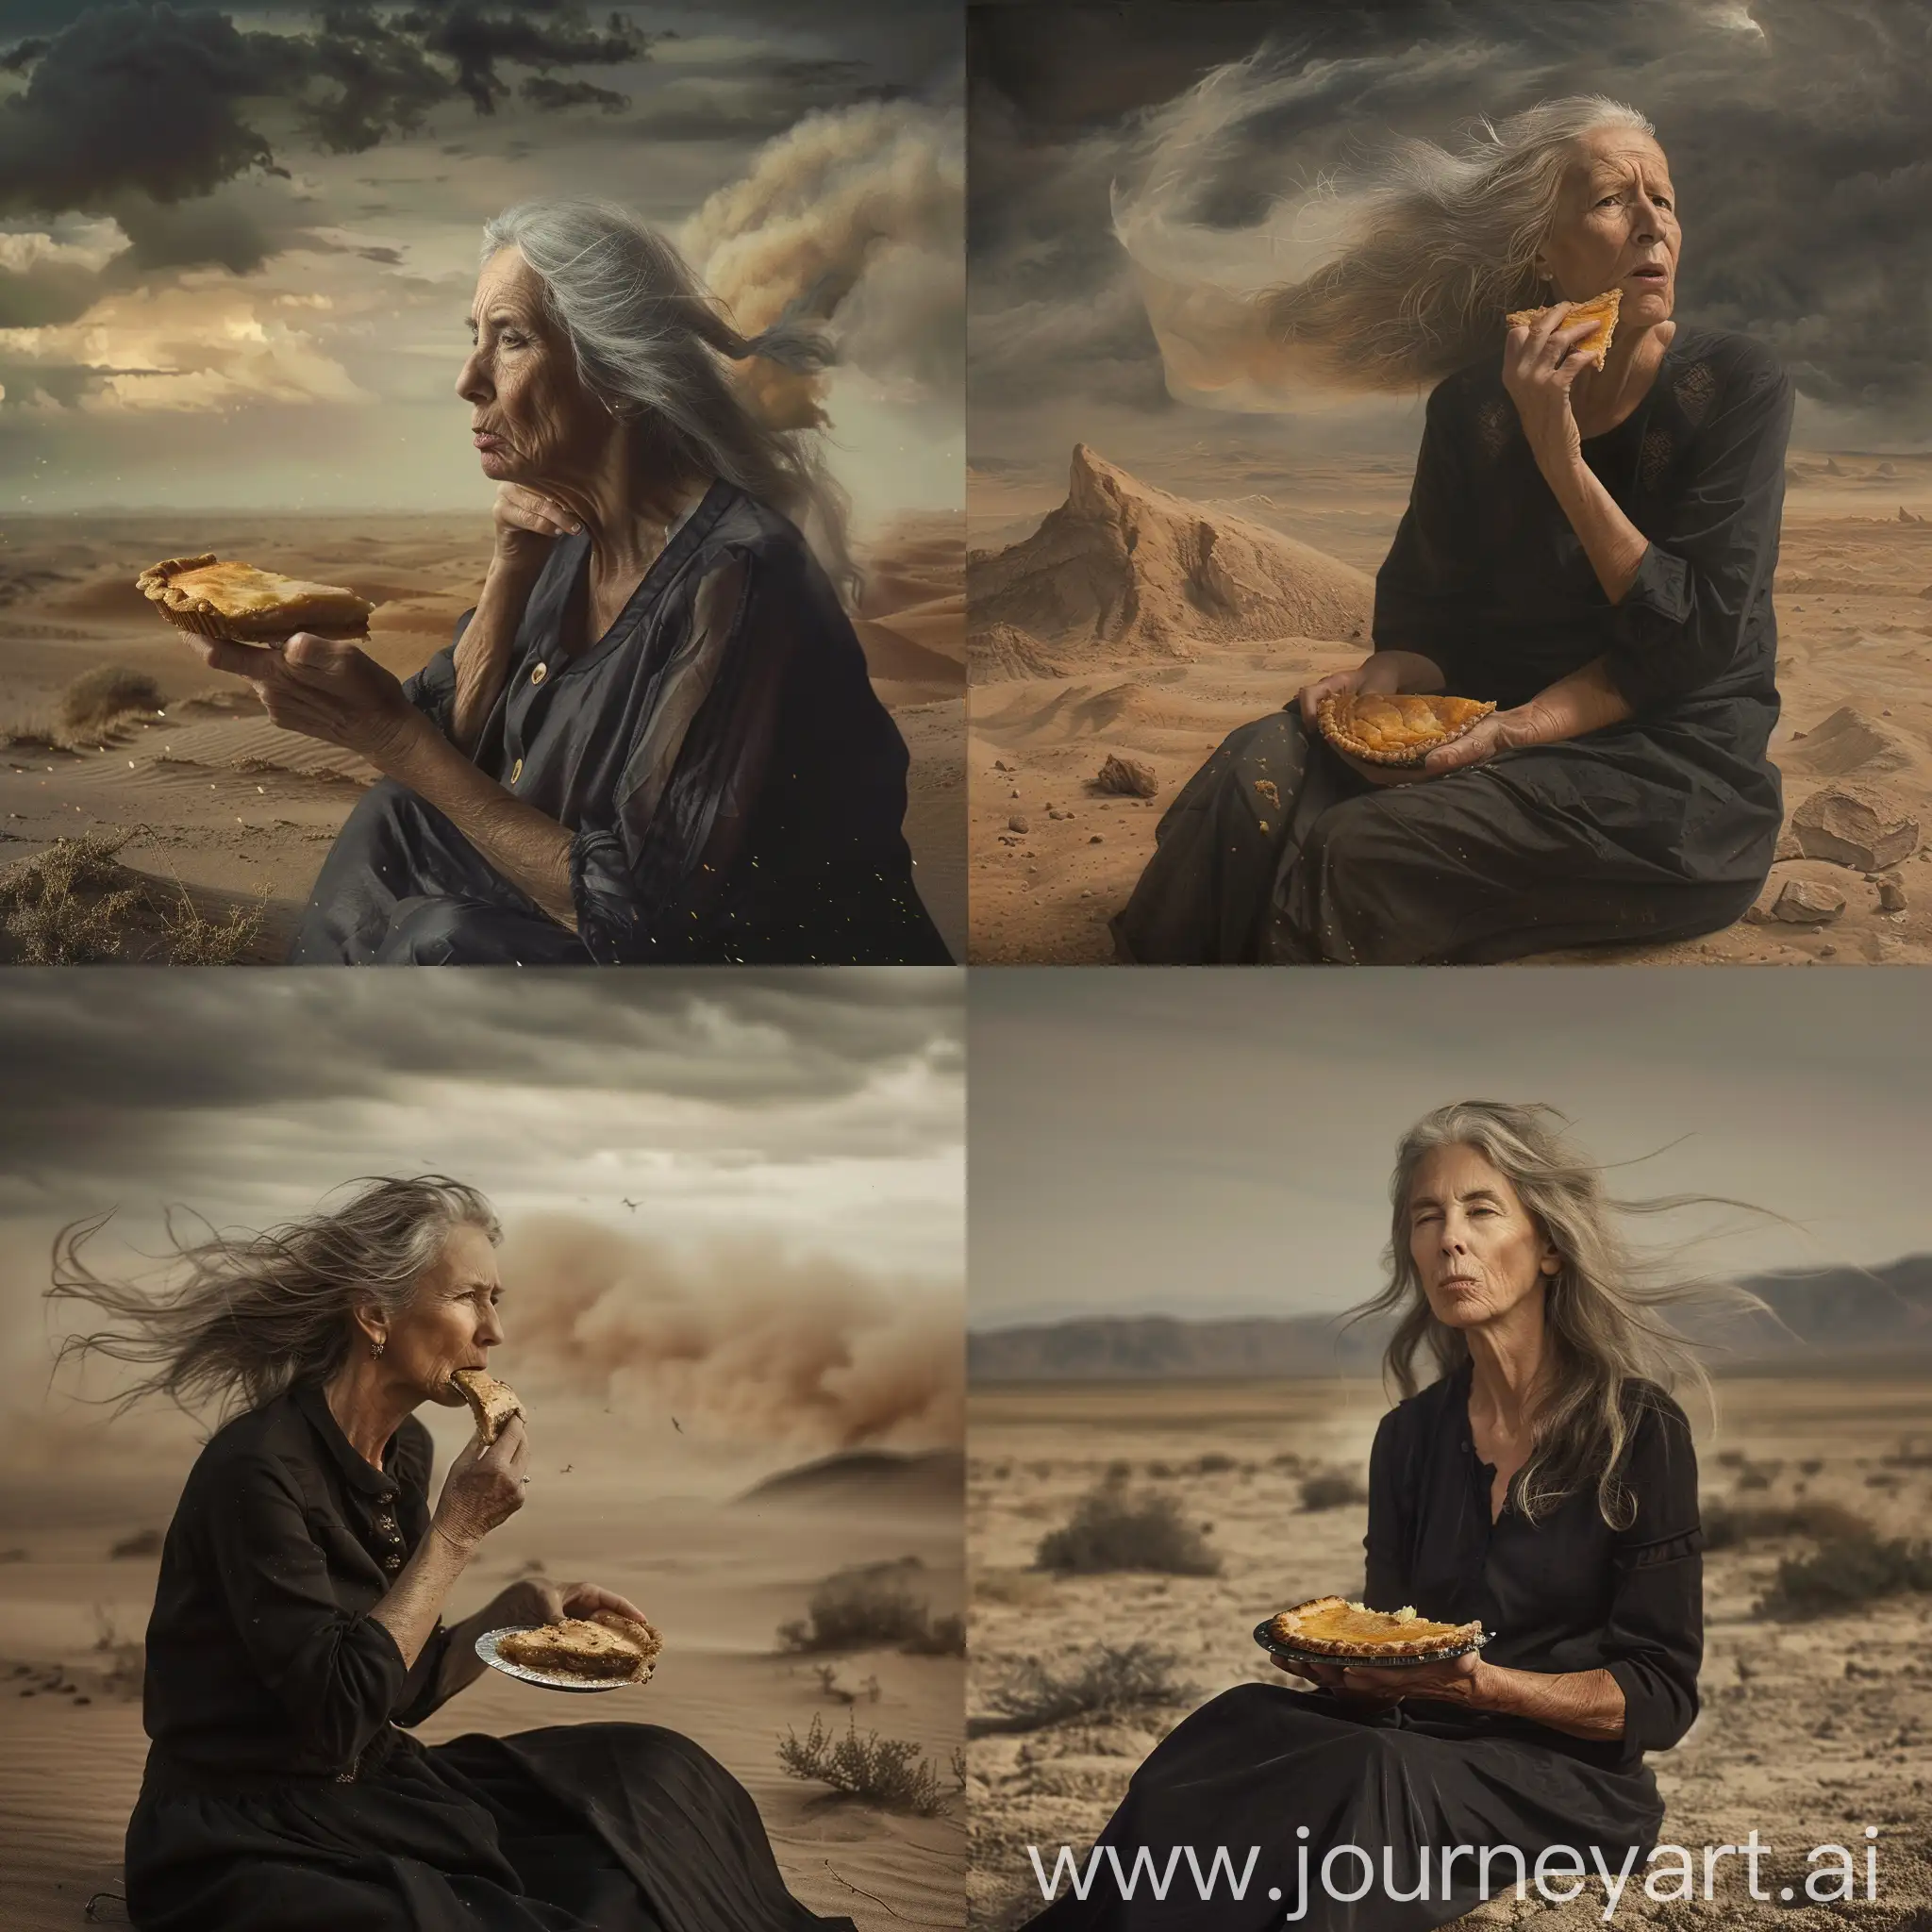 a middle aged woman sits alone in the desert, the wind is blowing and the desert is a wasteland, in the woman's hand is a slice of pie that she is devouring